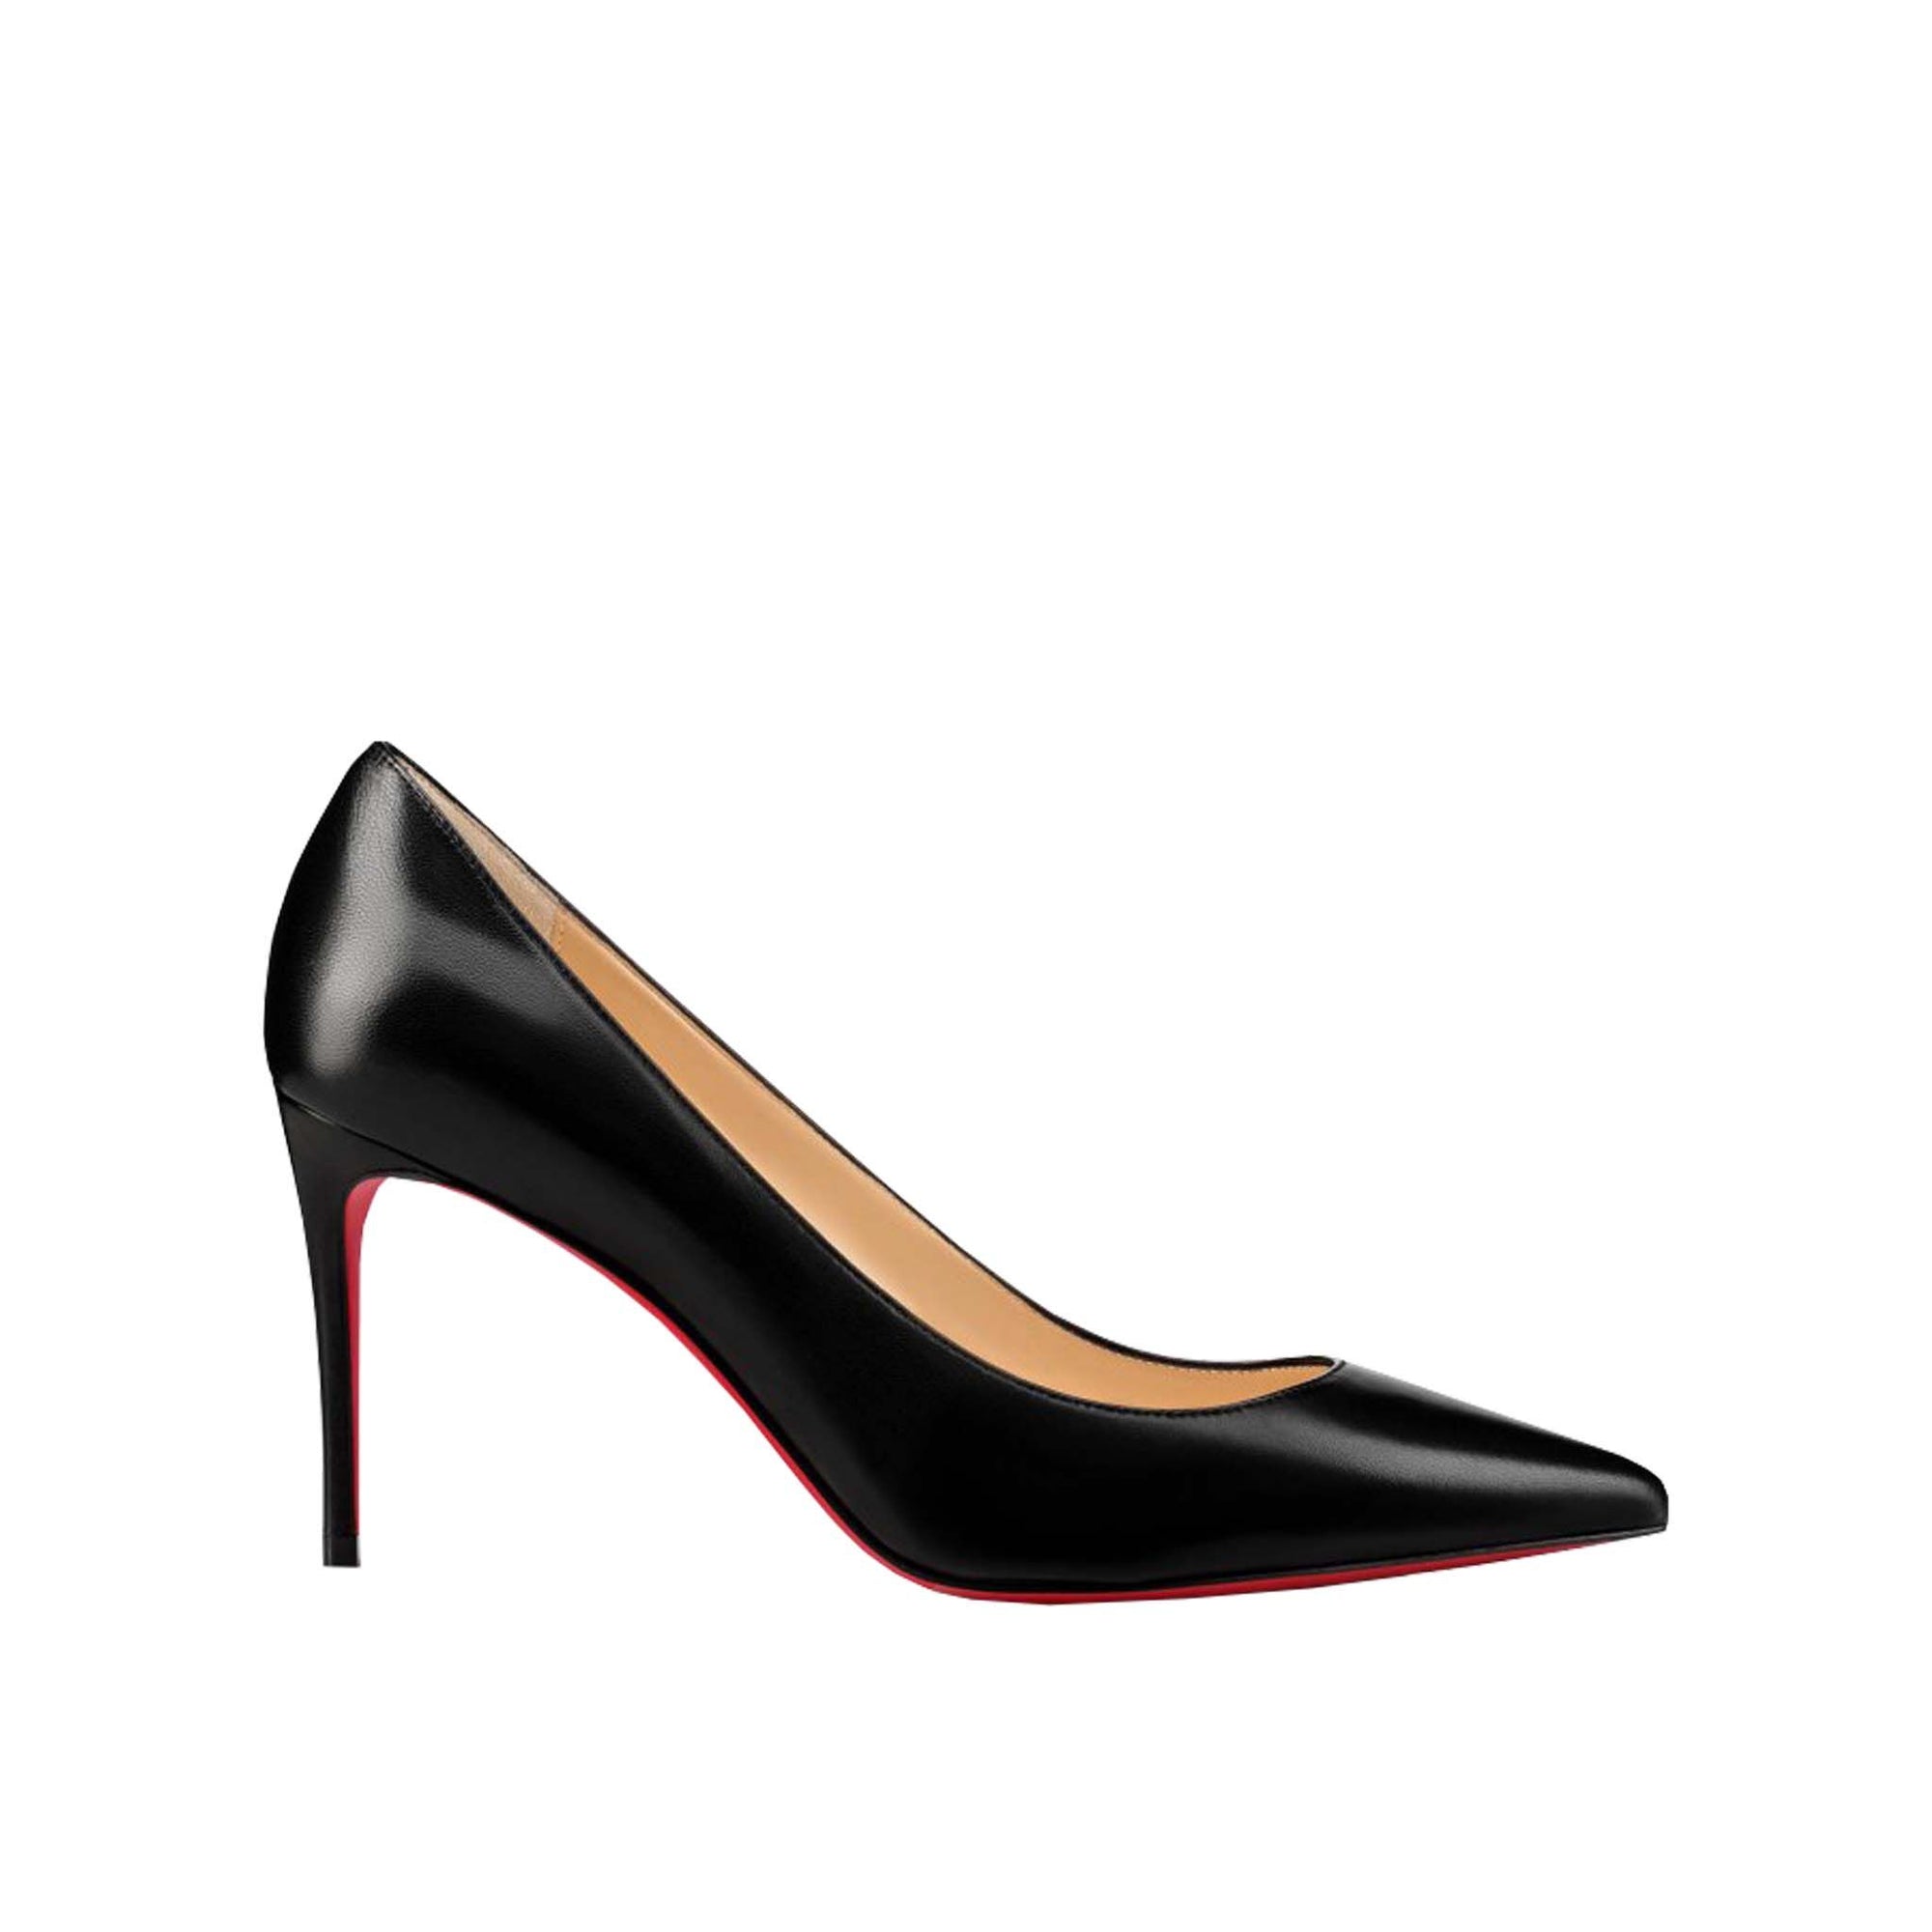 Elegant Black Leather Pumps with Iconic Sole